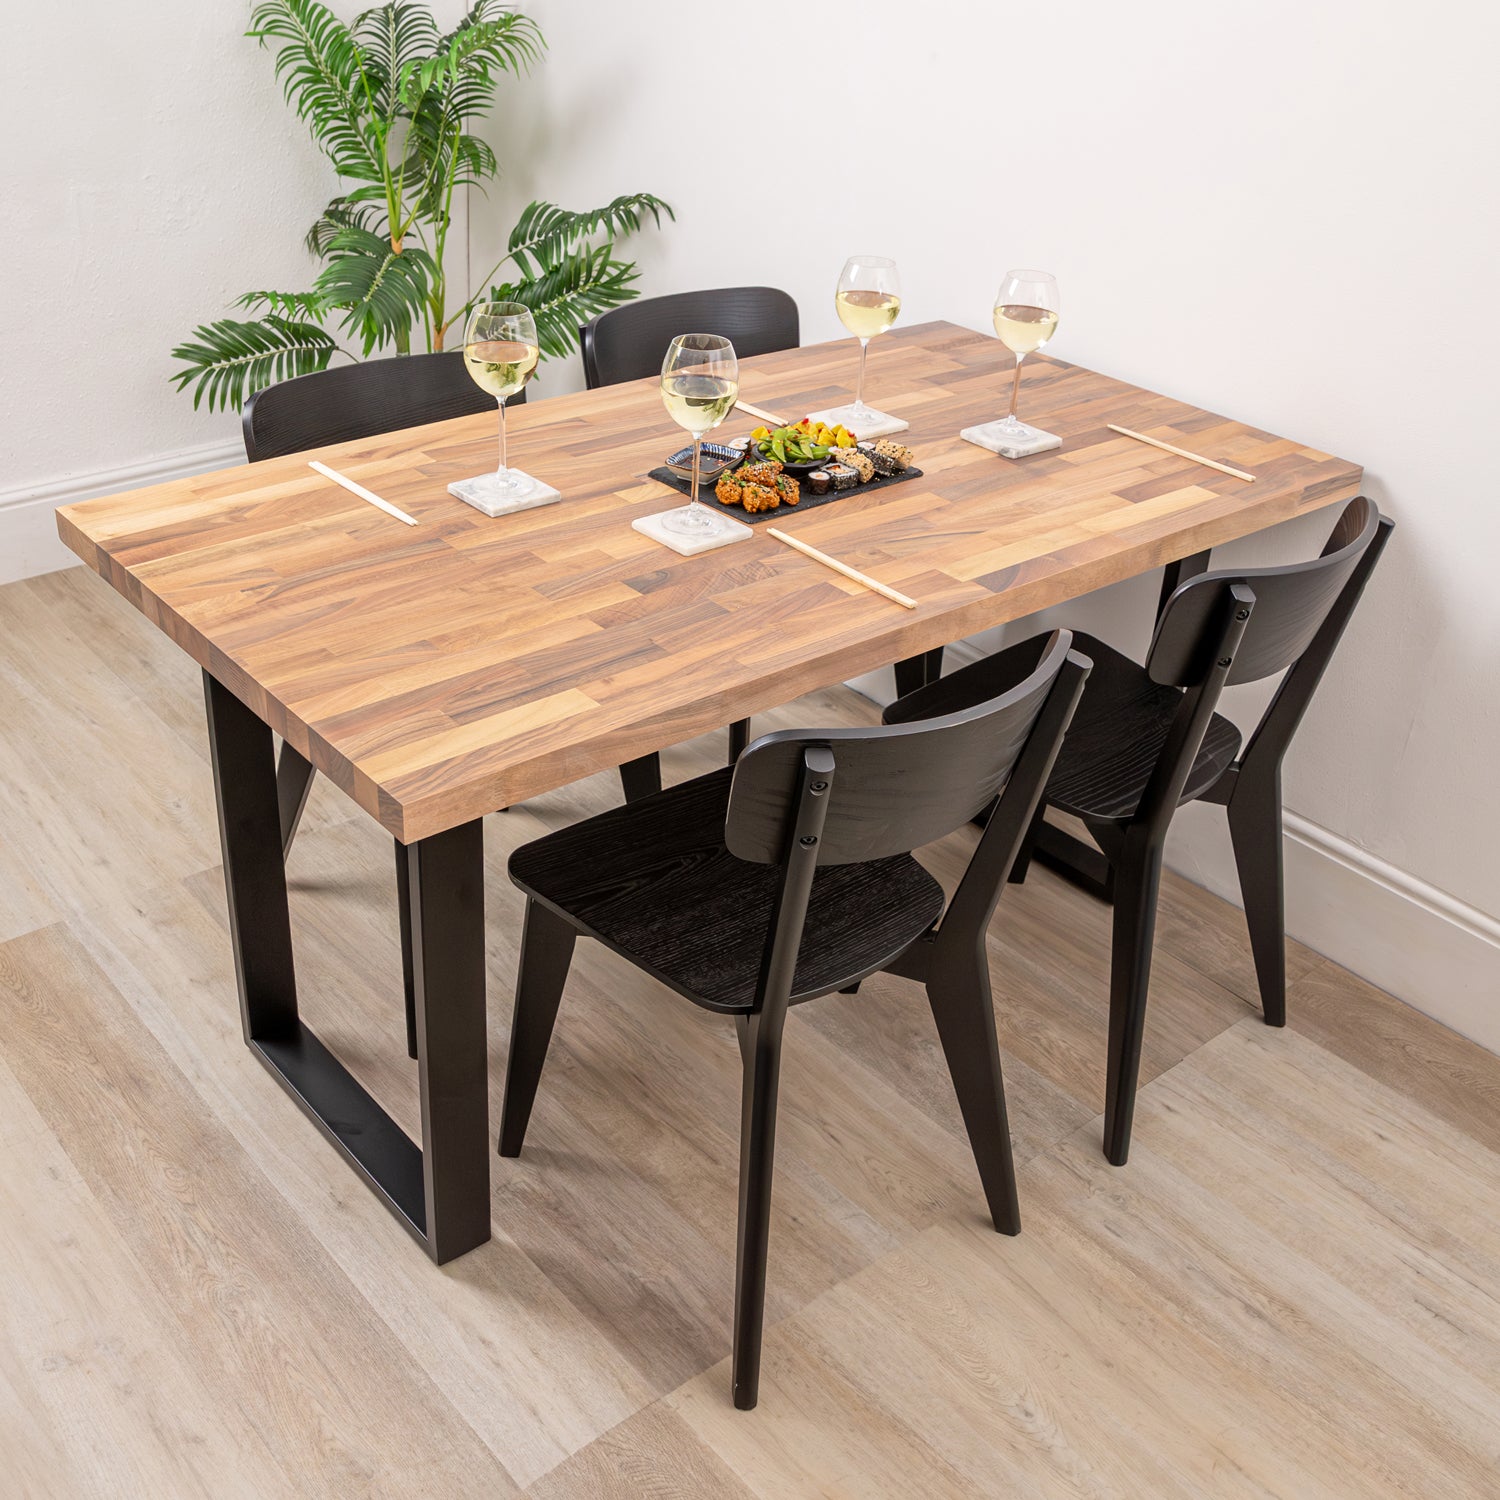 Walnut Solid Wood Table with Square Metal Legs (Sanded)